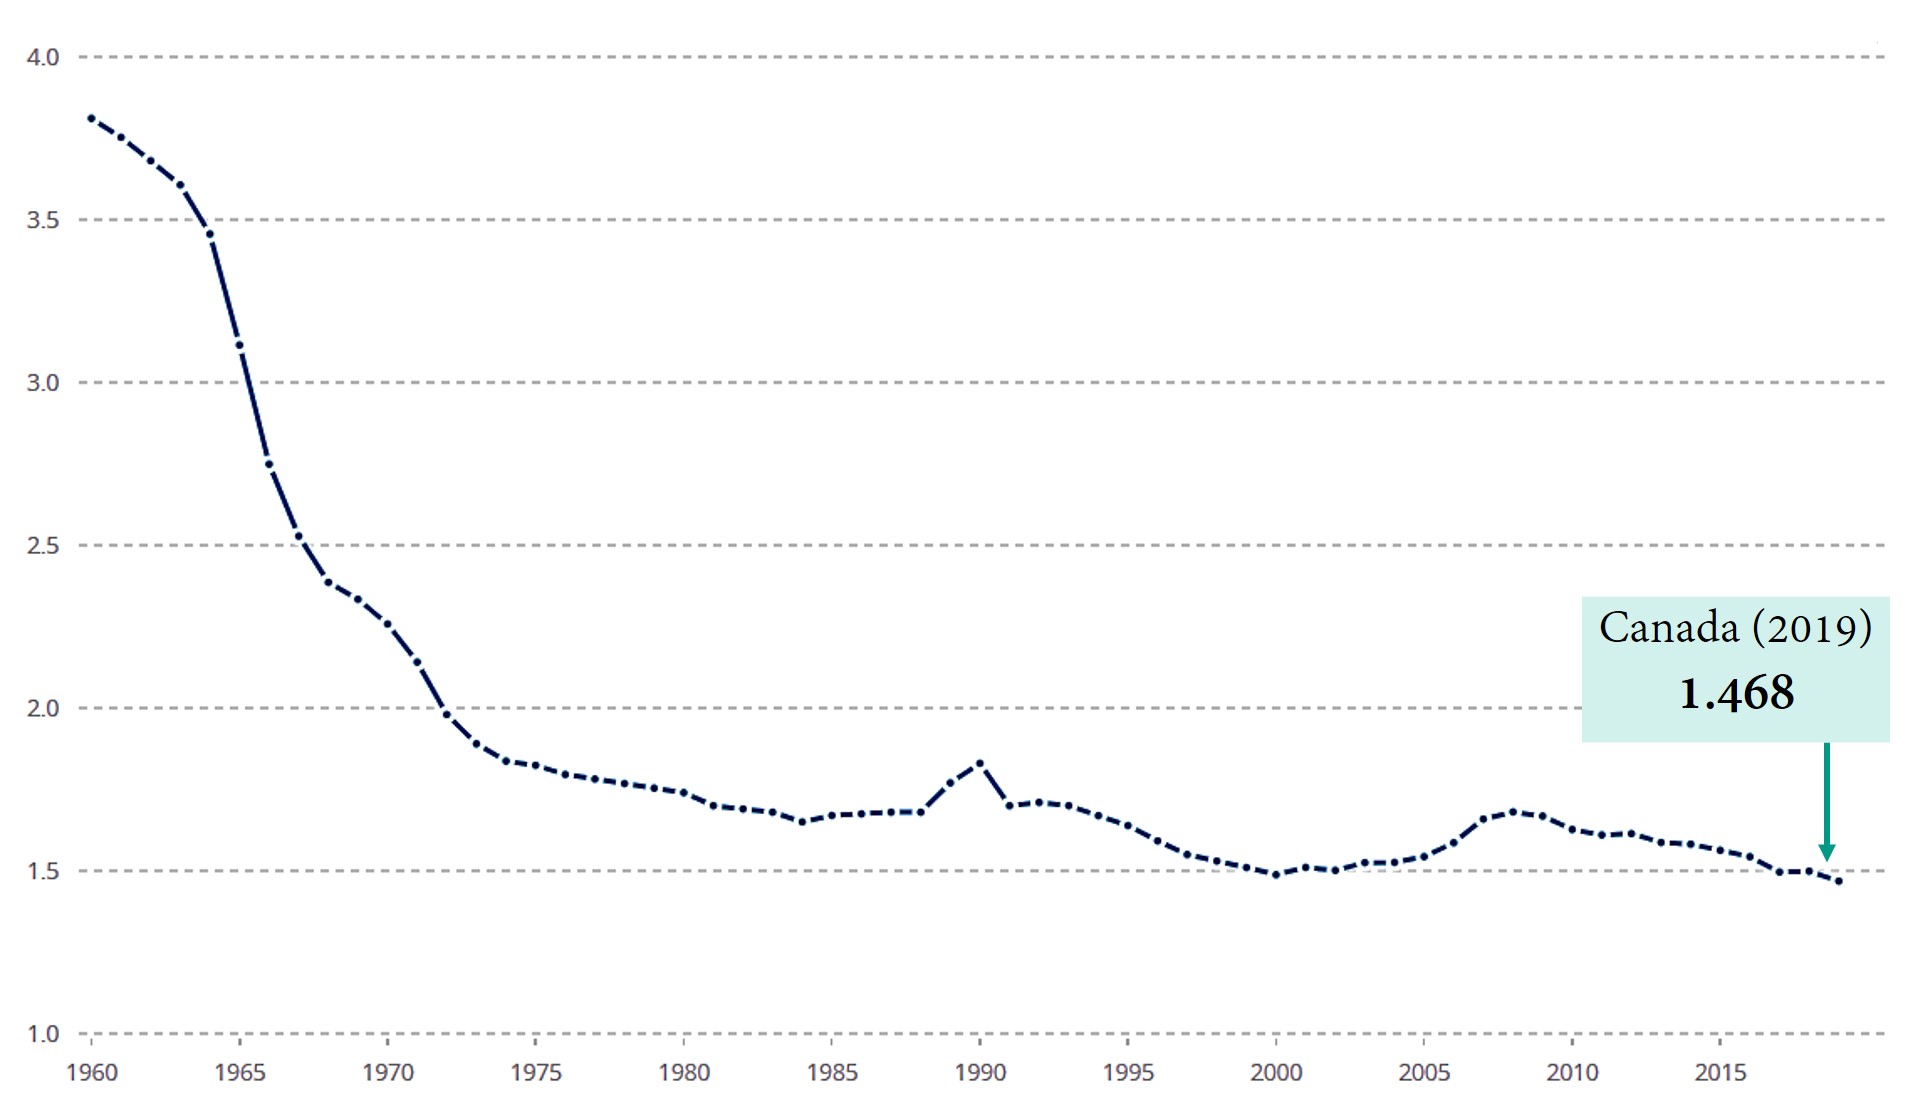 This graph shows Canada's TFR falling from about 3.8 children per woman in 1960 to about 1.8 in 1975. After that it declined more gradually., with some ups and downs, to about 1.5 children per woman in 2019.